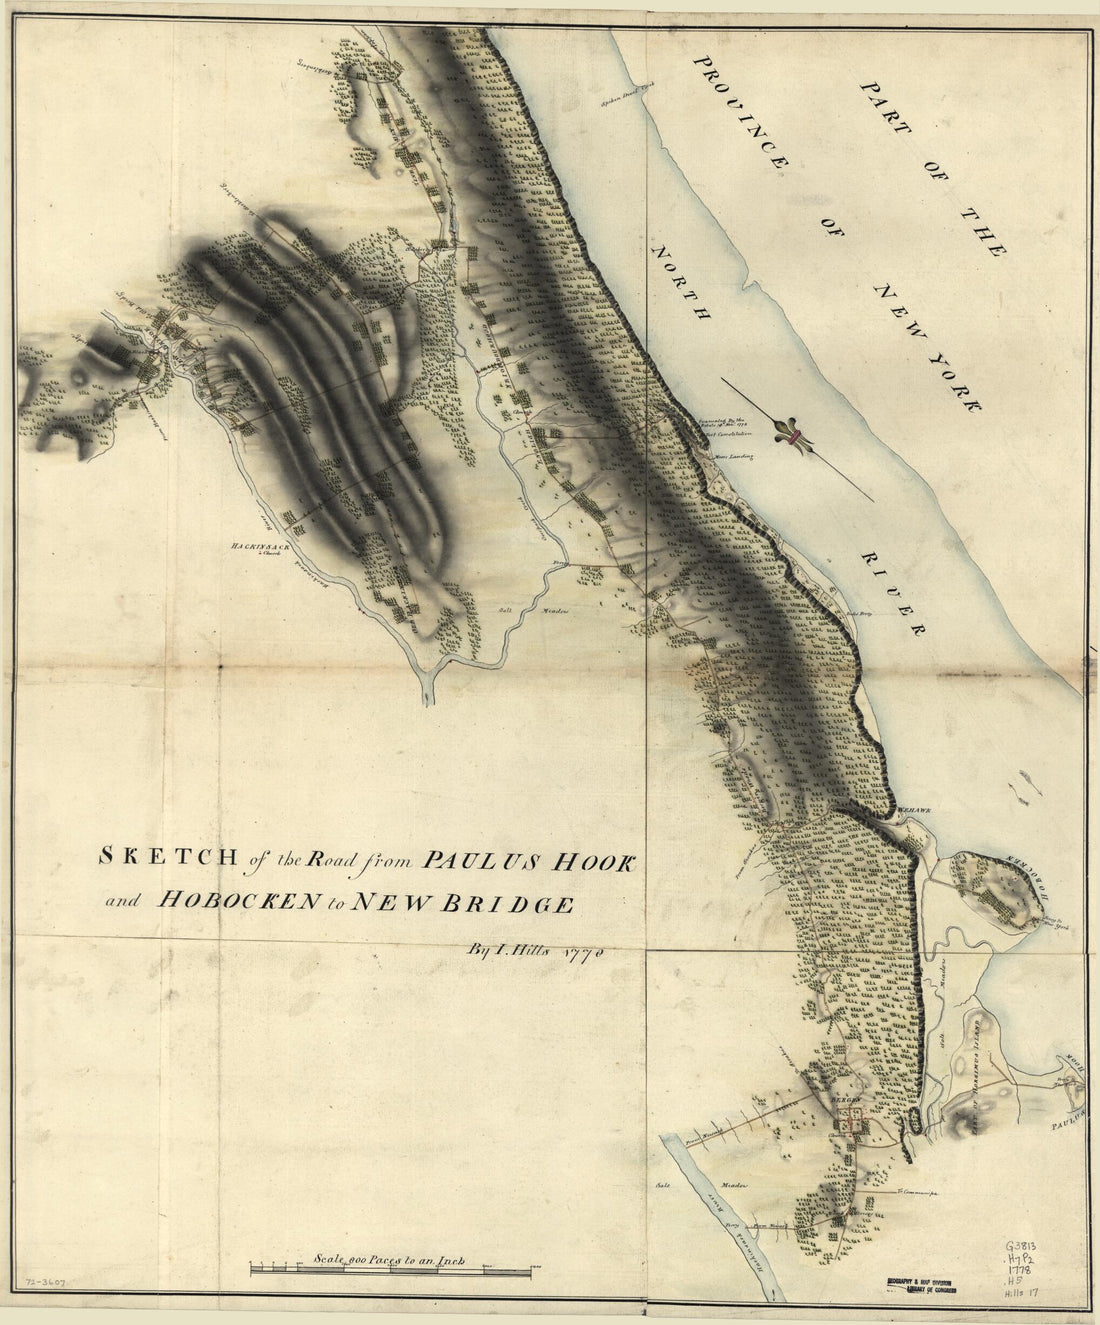 This old map of Sketch of the Road from Paulus Hook and Hobocken to New Bridge from 1778 was created by John Hills, Benjamin Morgan in 1778